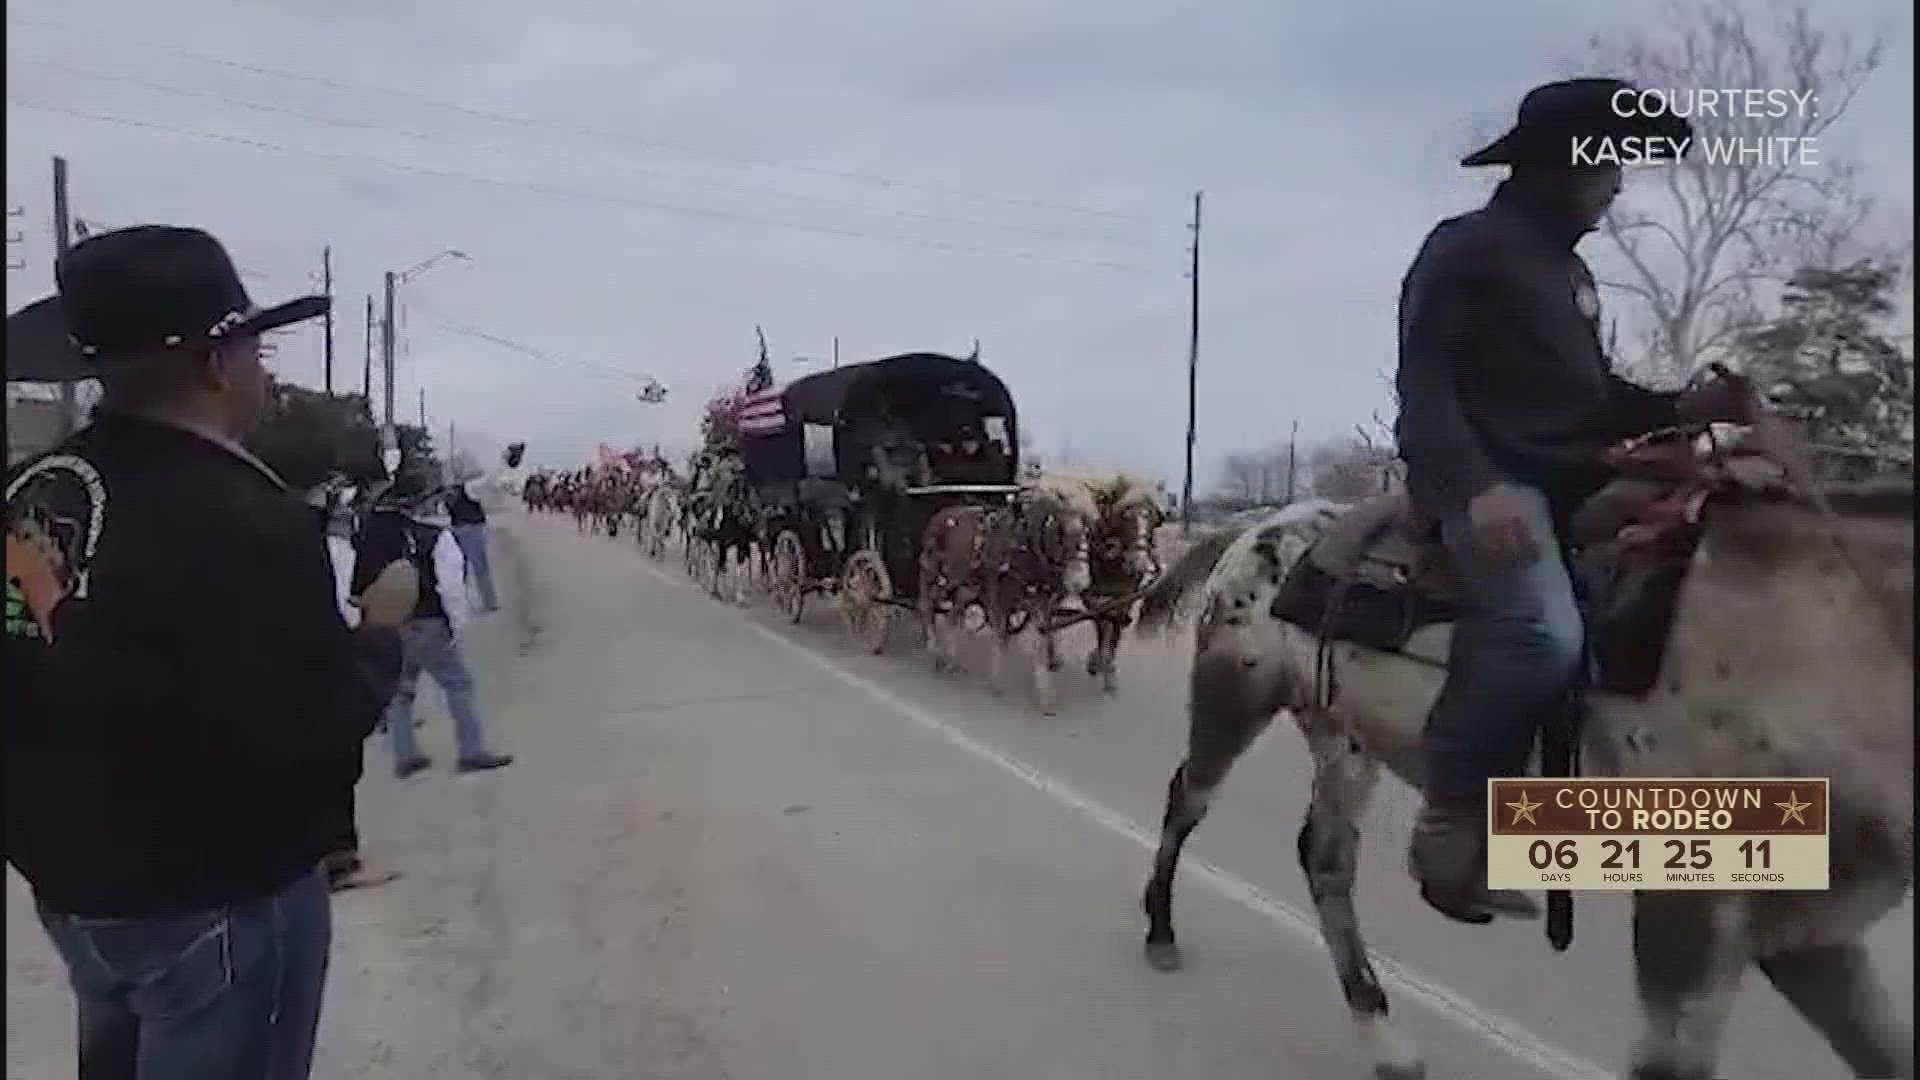 RodeoHouston is just days away and trail riders are making their way into town.